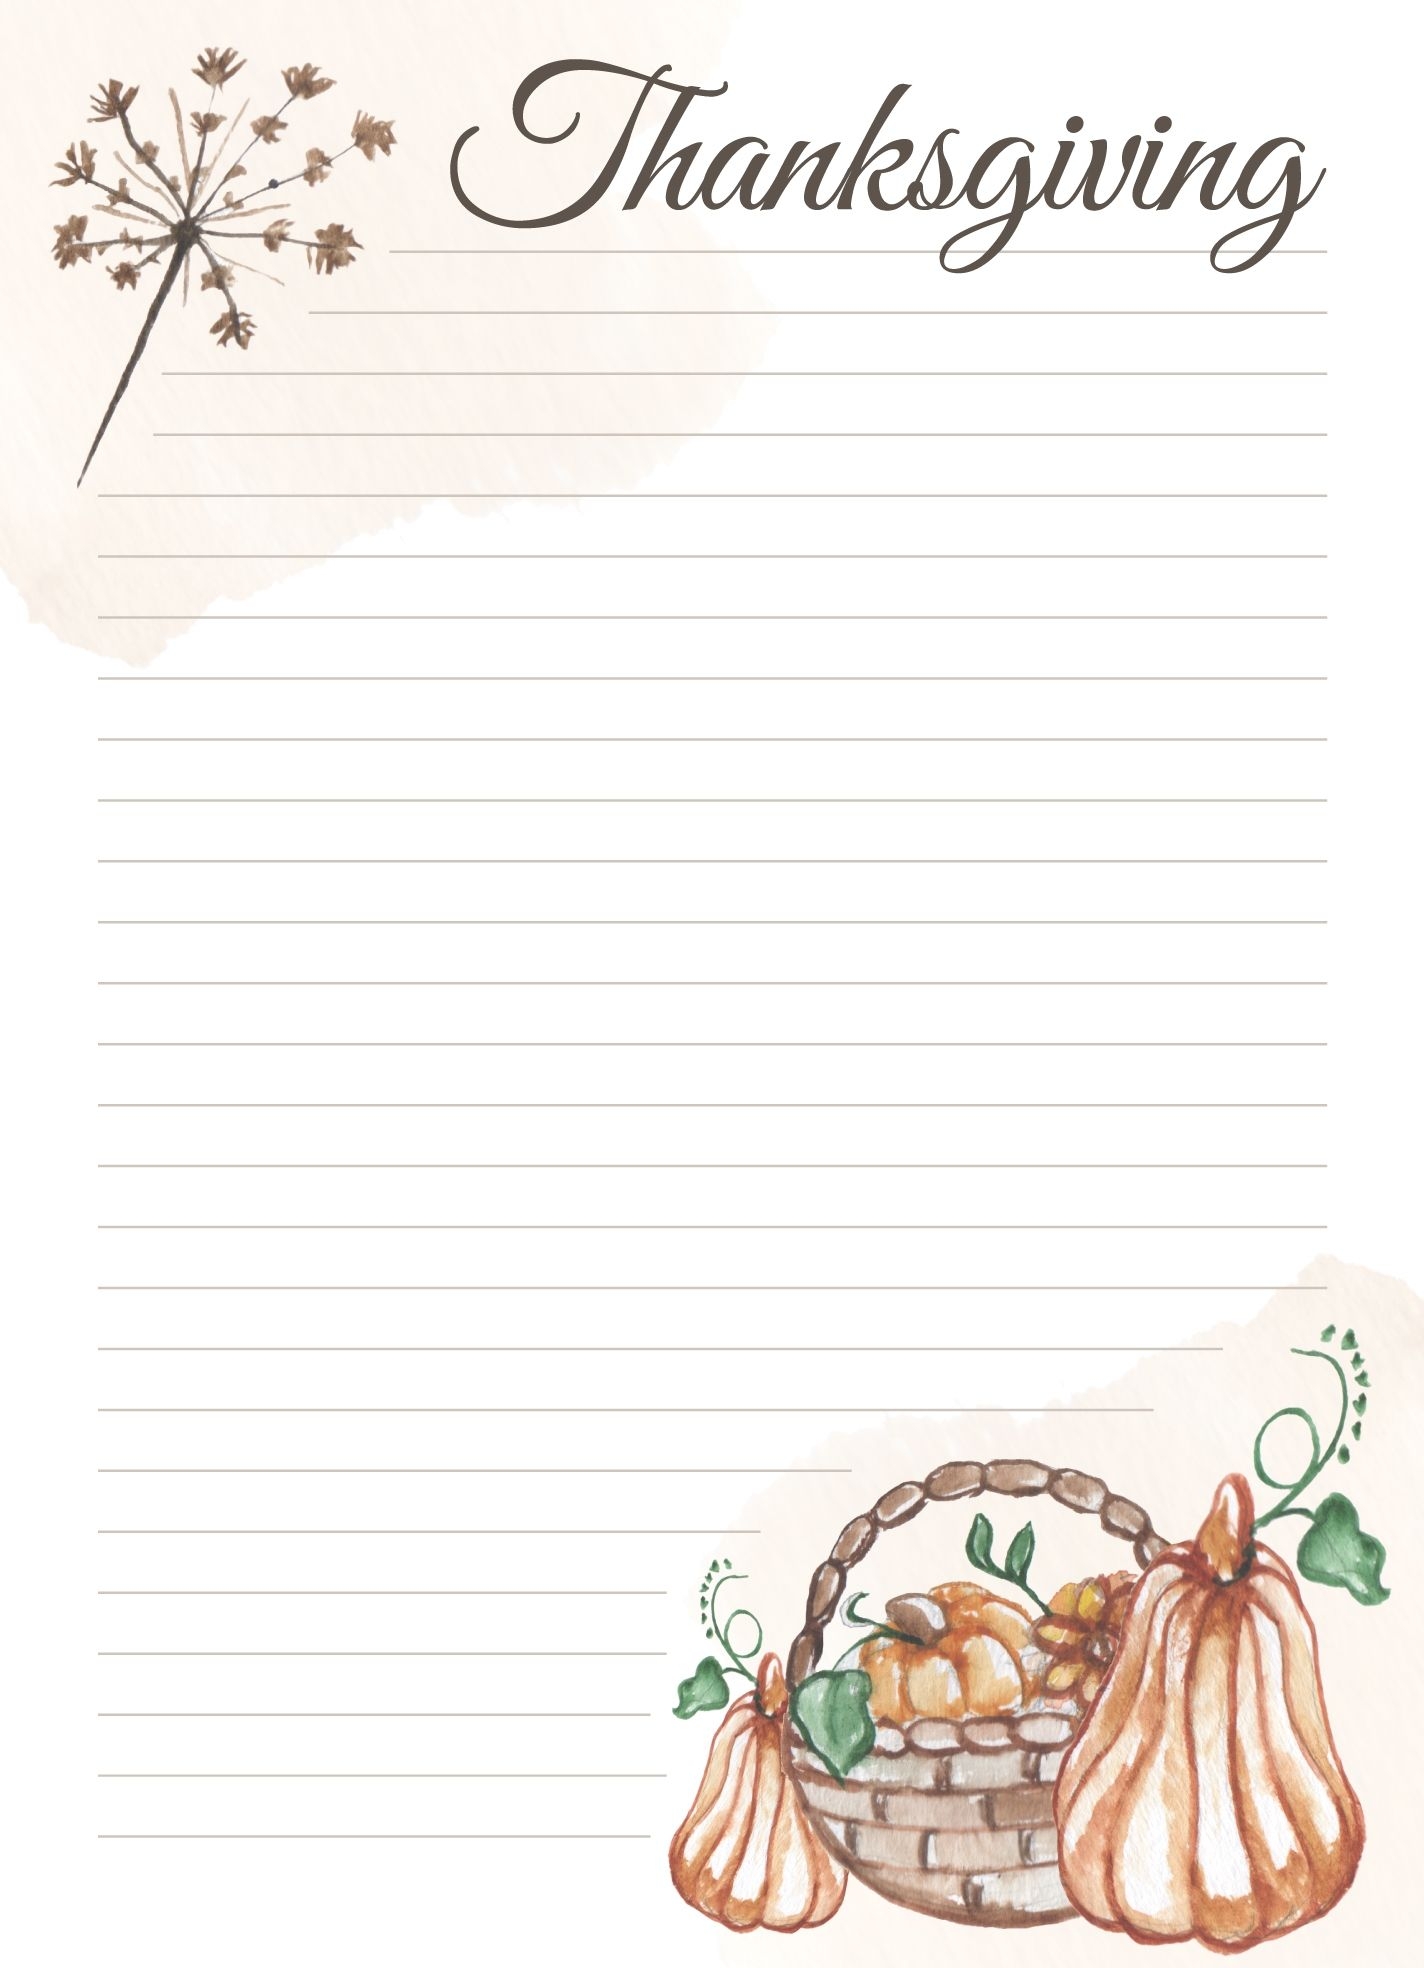 Thanksgiving Lined Paper Free Google Docs Template Free Printable Stationery Thanksgiving Planner Lined Paper